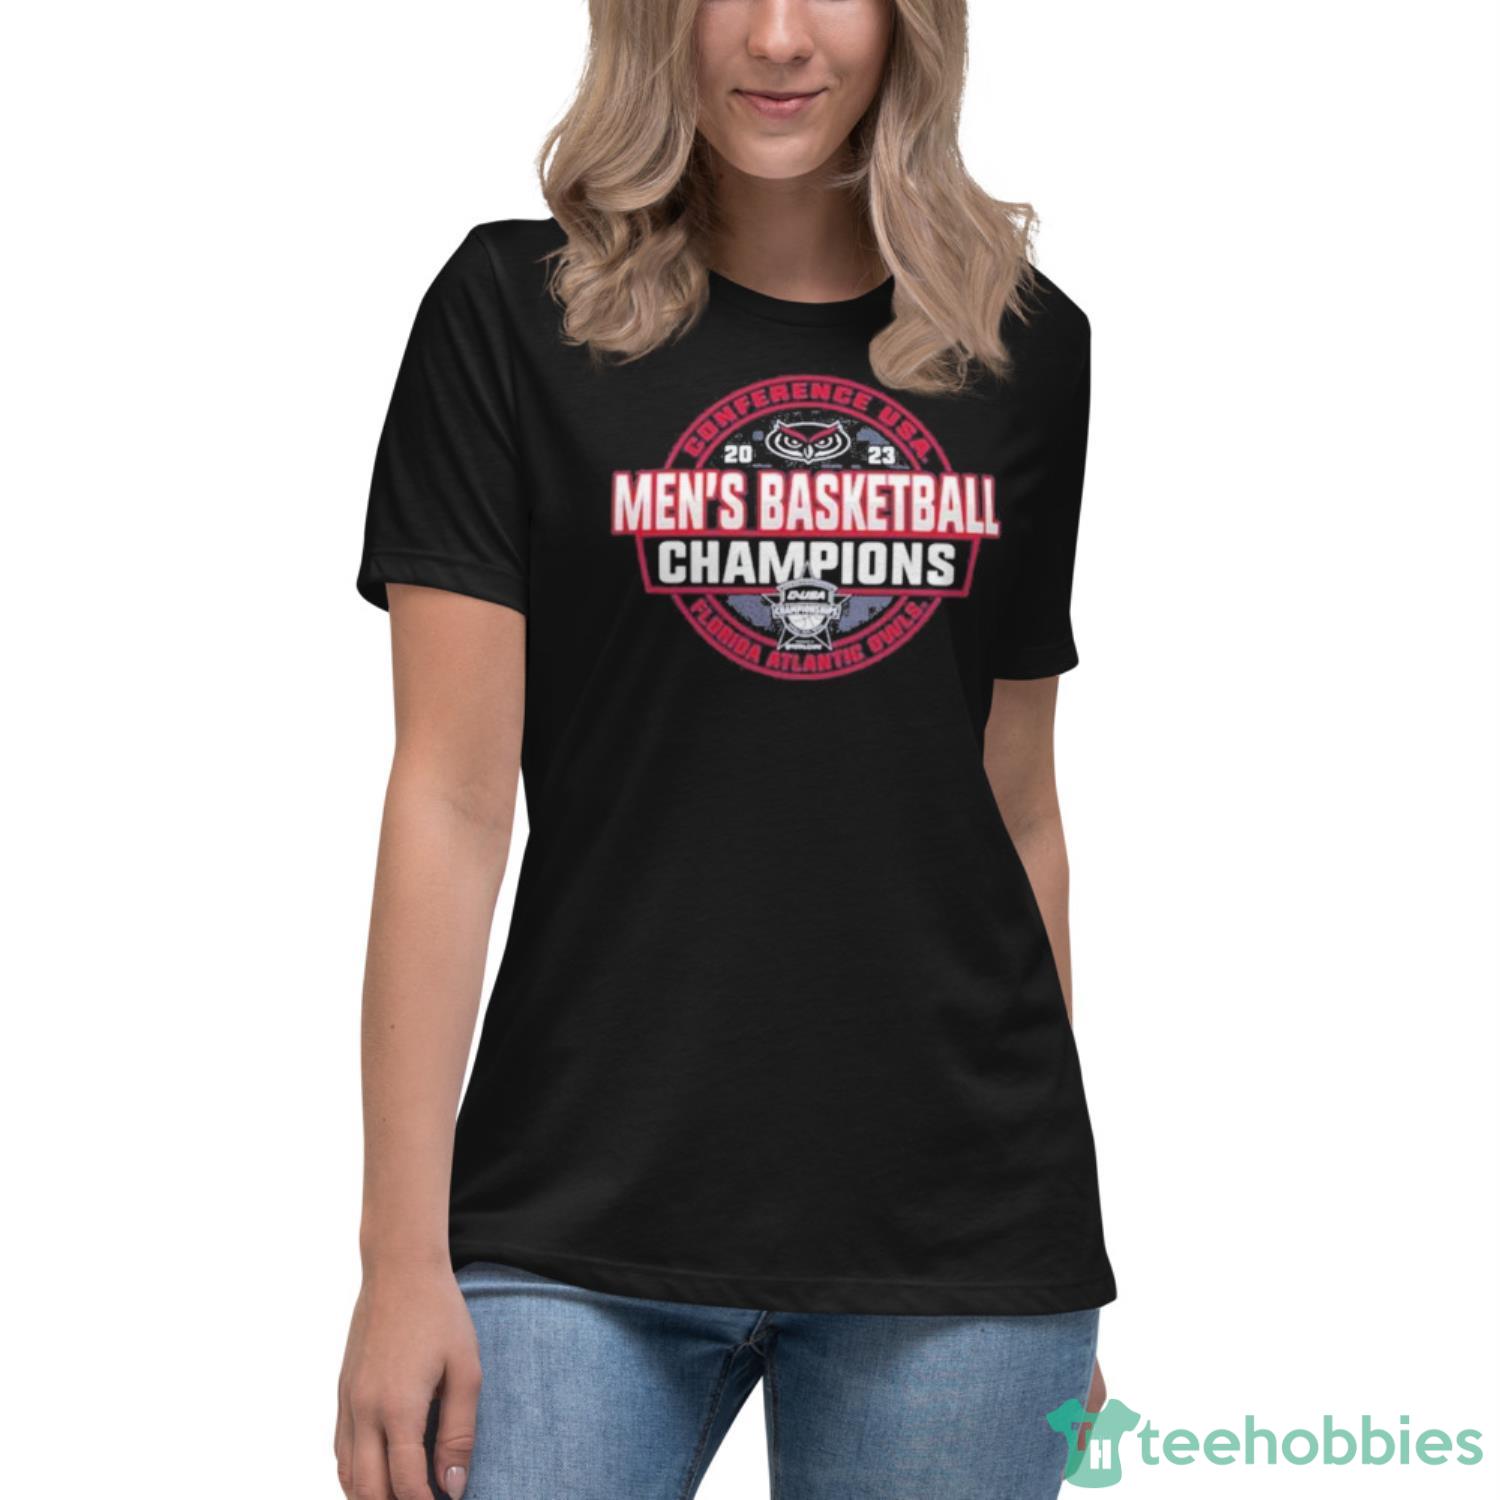 2023 c-usa men’s basketball conference tournament champions locker room t-shirt - Womens Relaxed Short Sleeve Jersey Tee